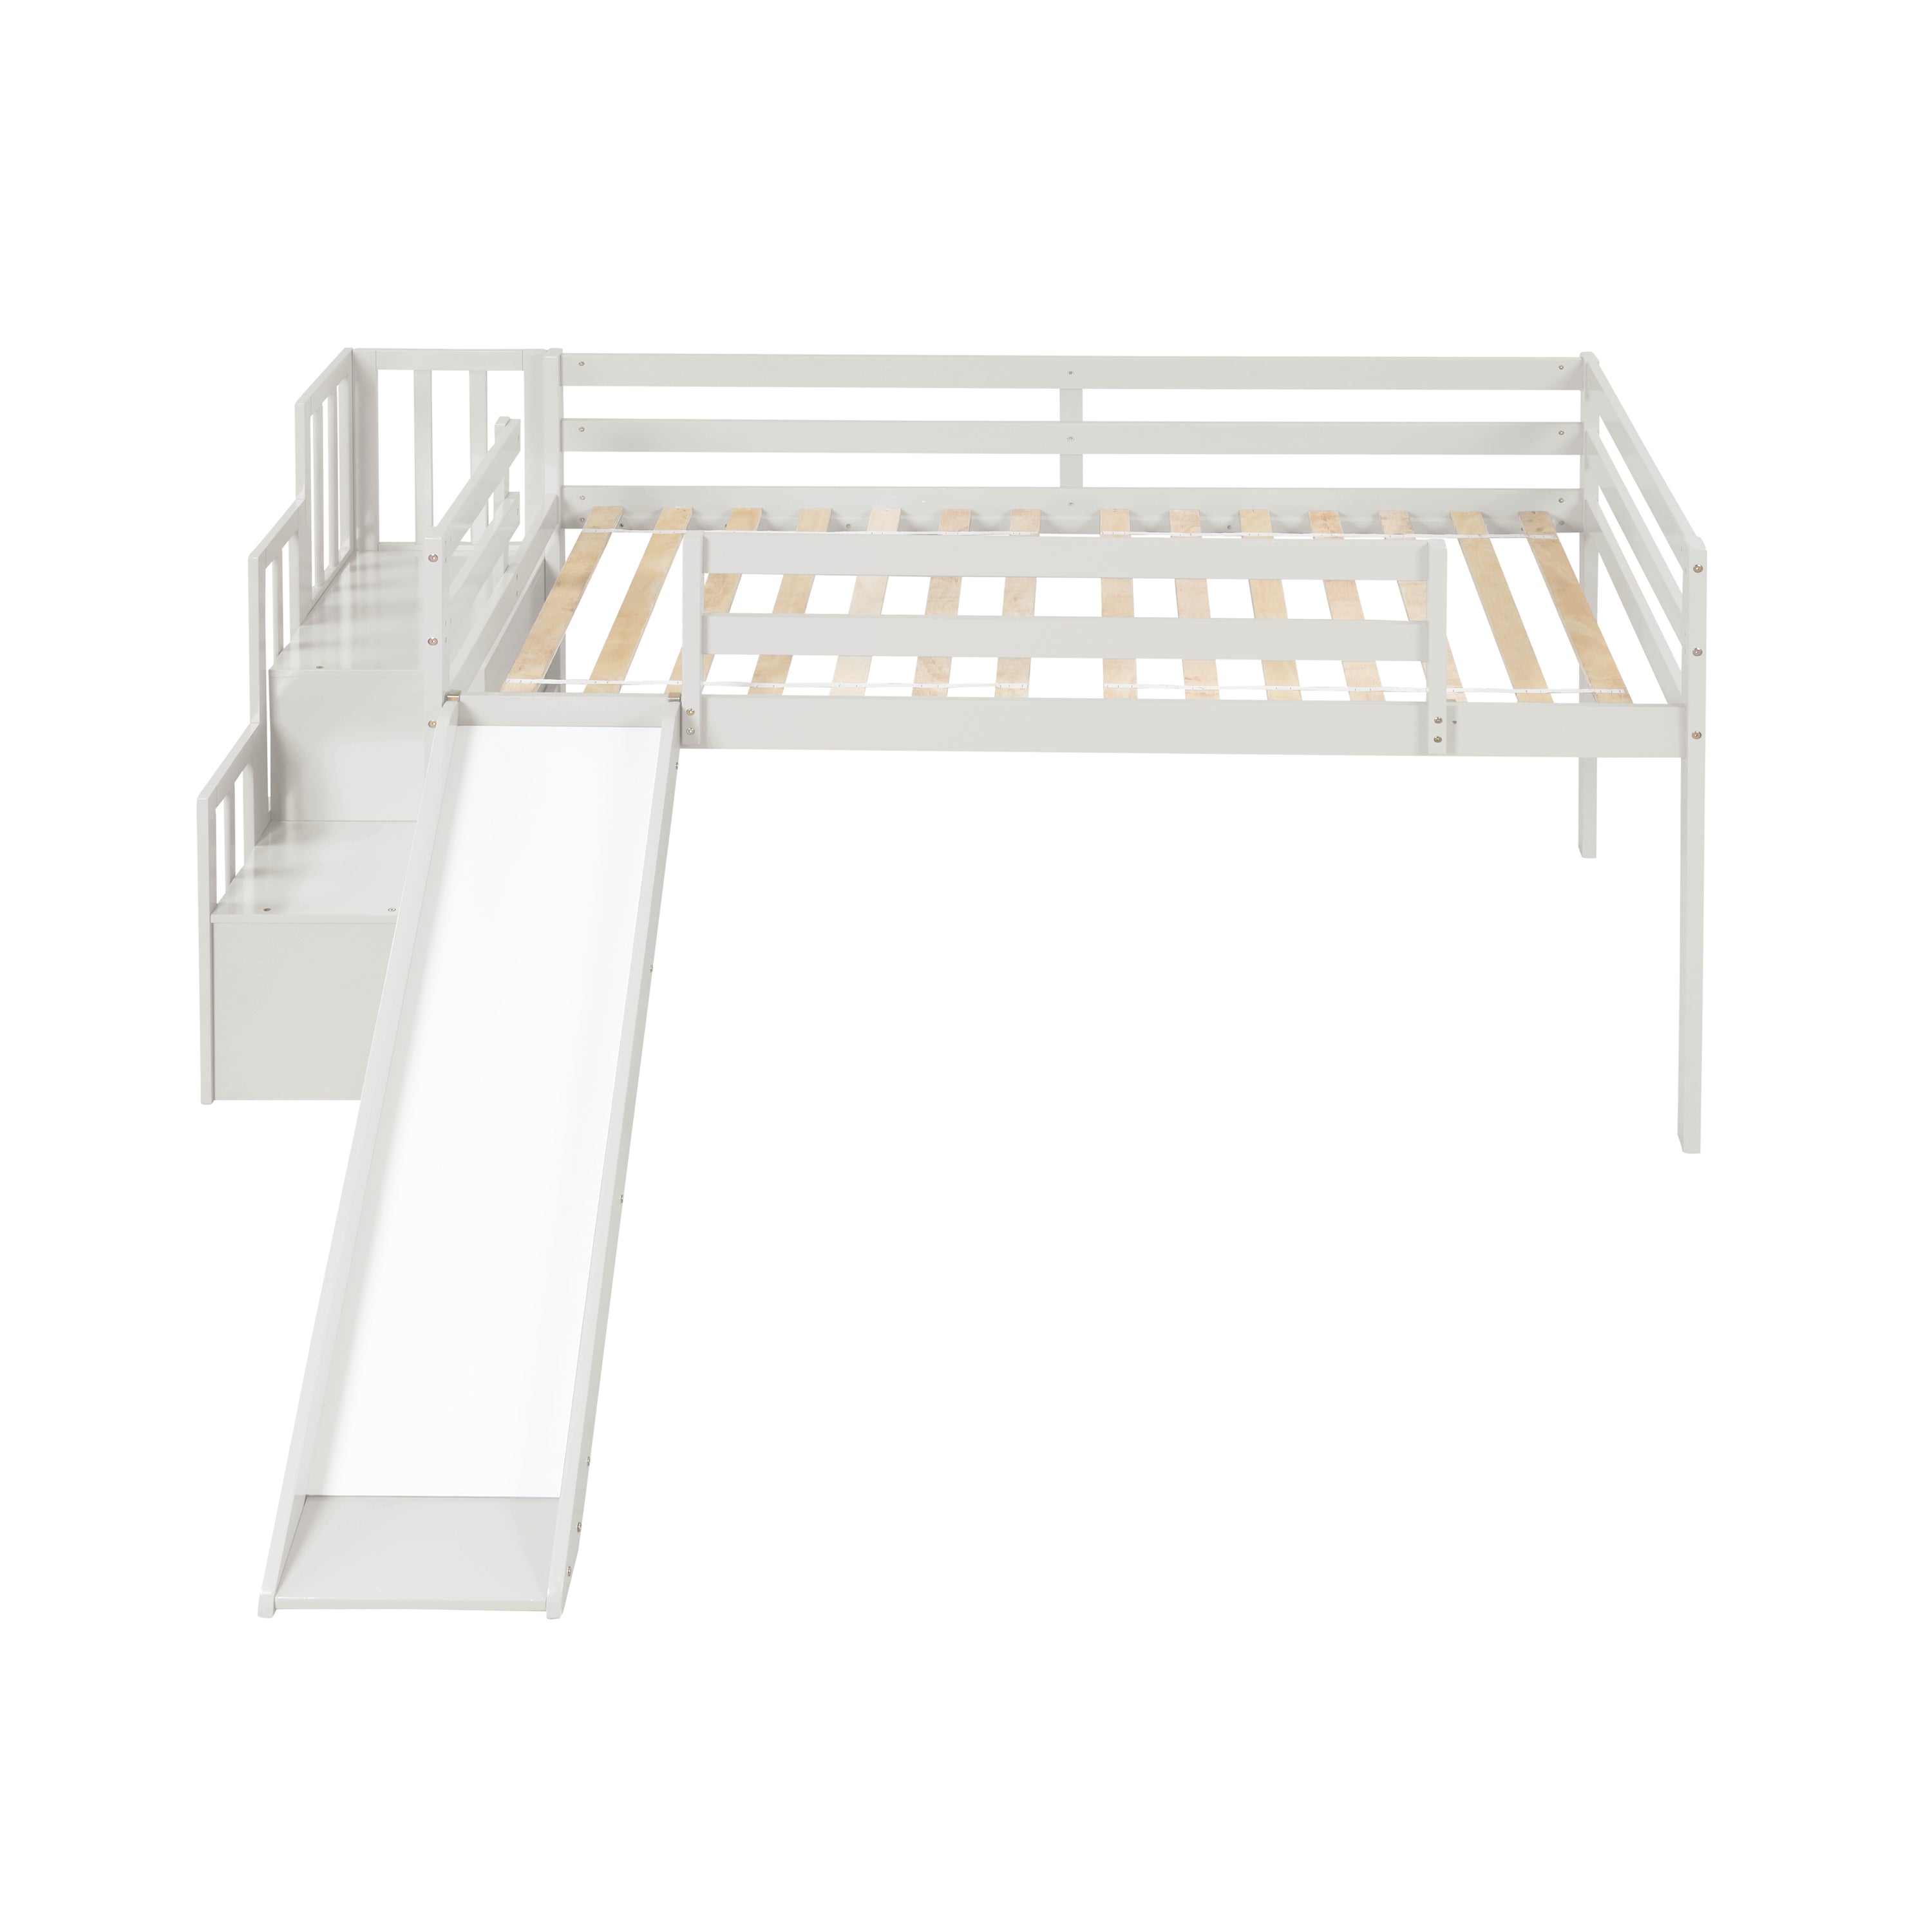 Loft Bed with Staircase (White)